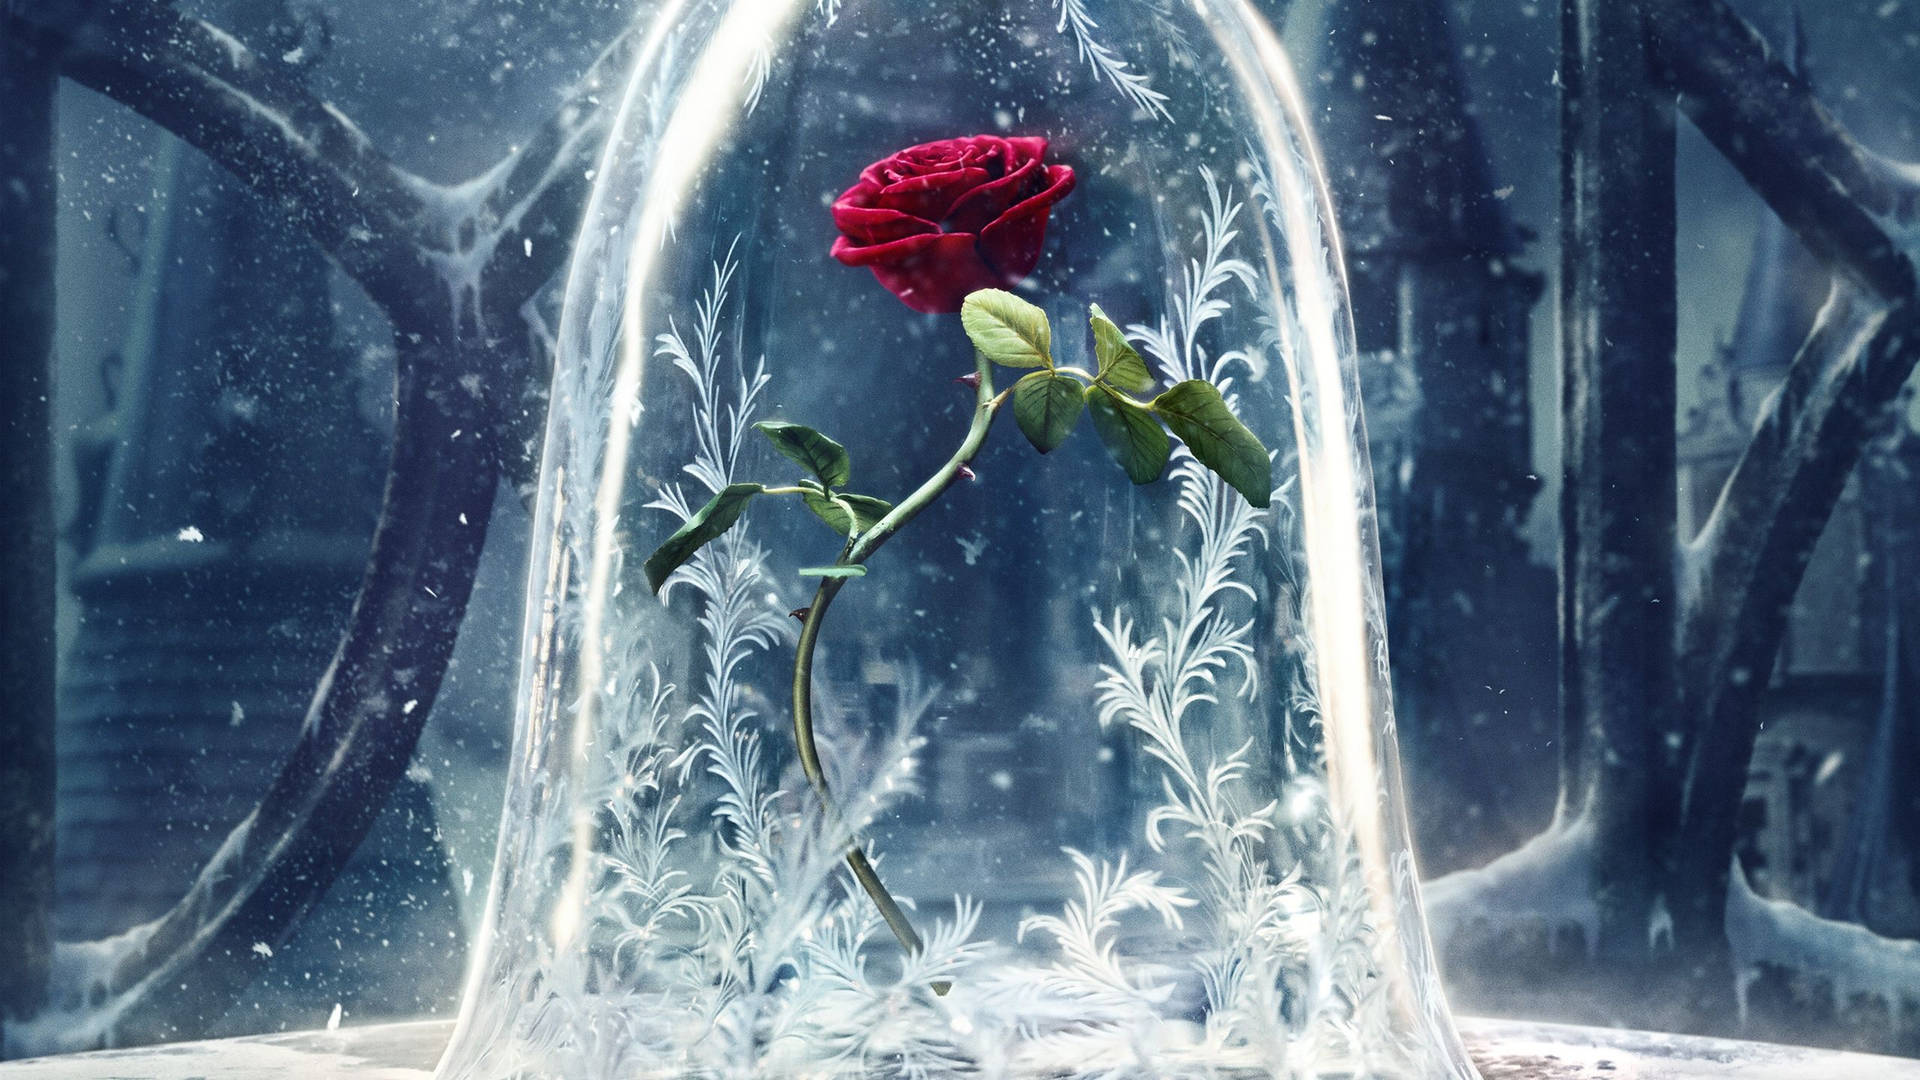 Beauty And The Beast 2560X1440 Wallpaper and Background Image